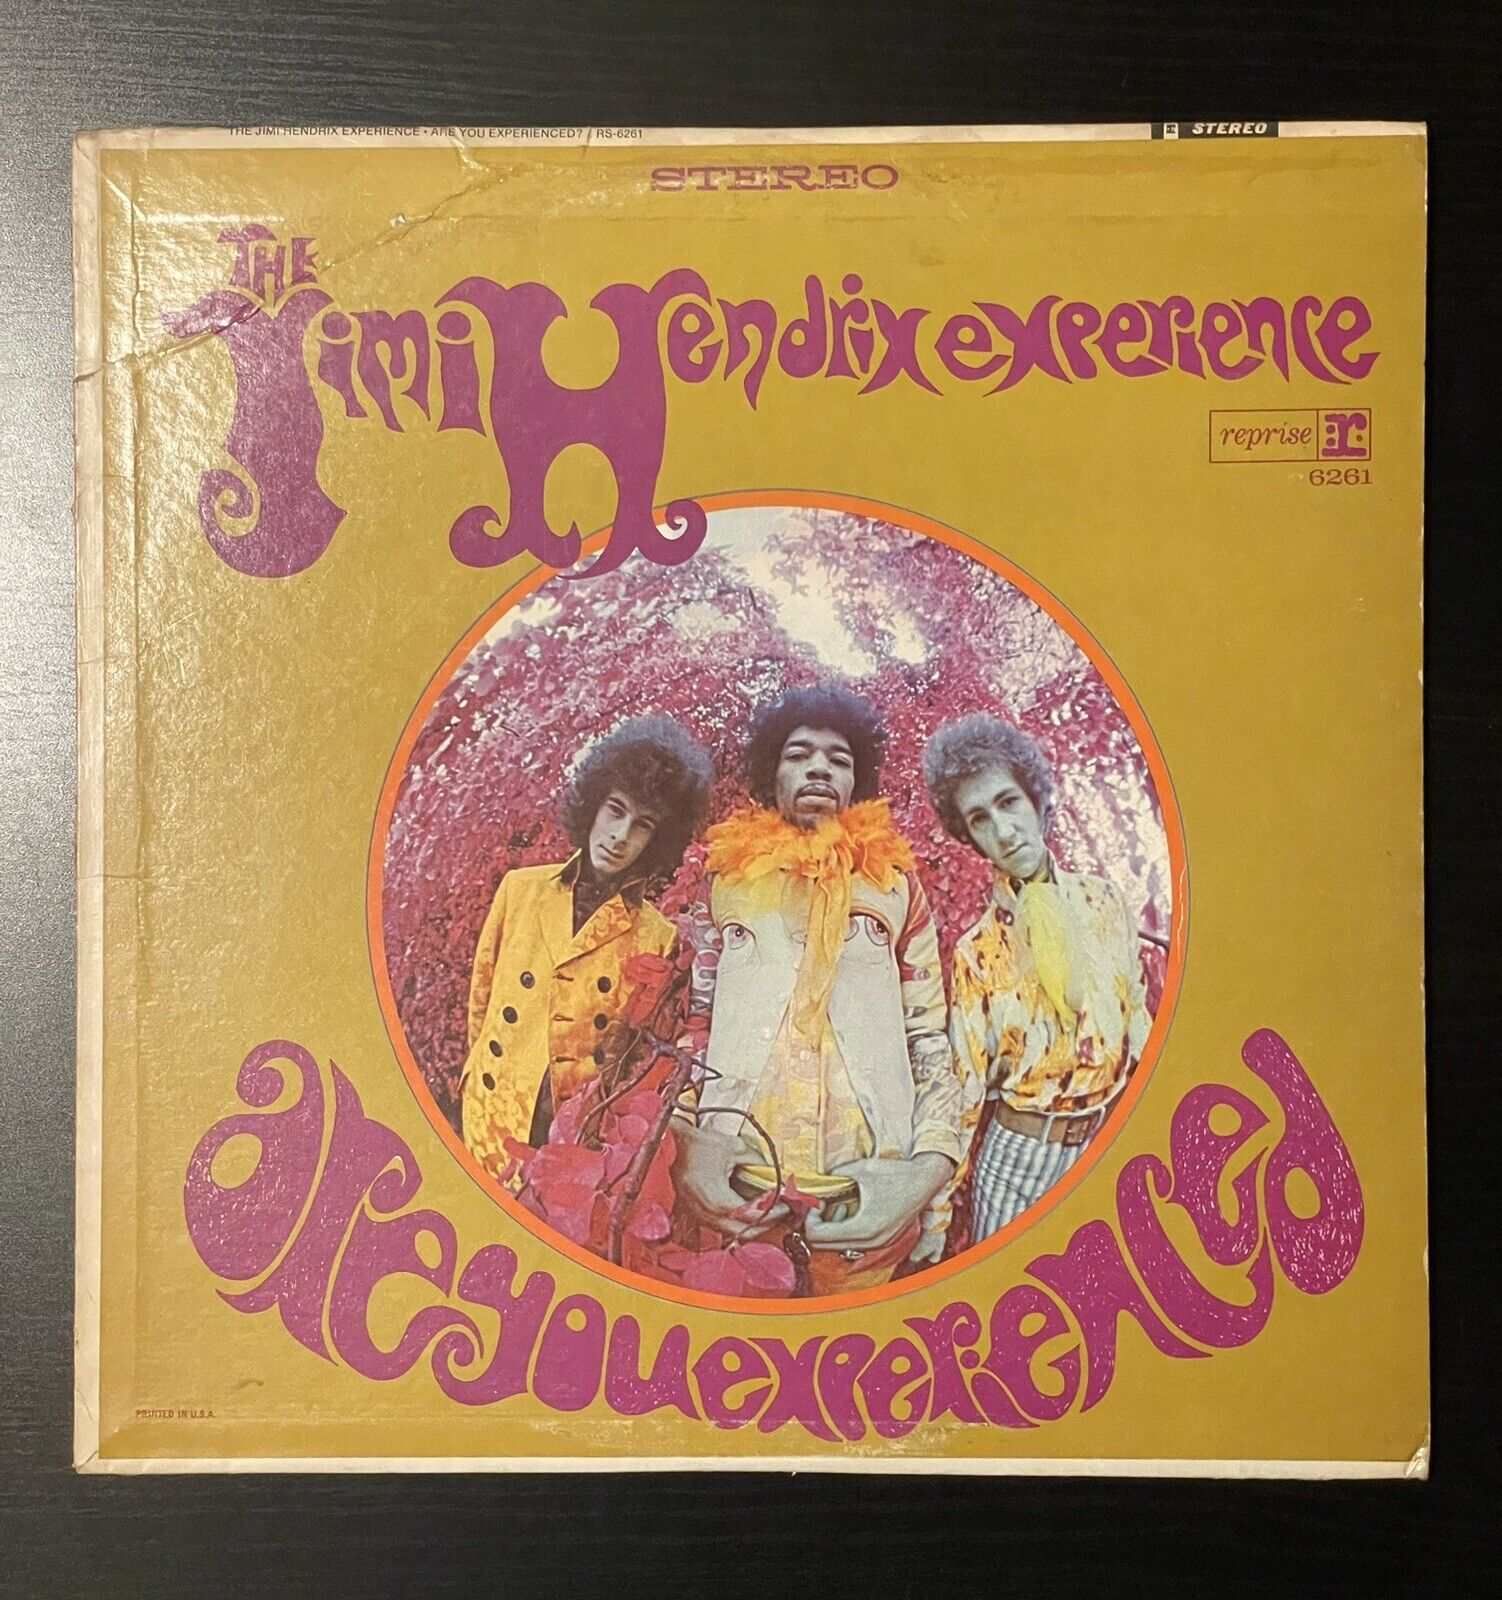 The Jimi Hendrix Experience - Are You Experienced LP Vinyl 1967 Tricolor Reprise